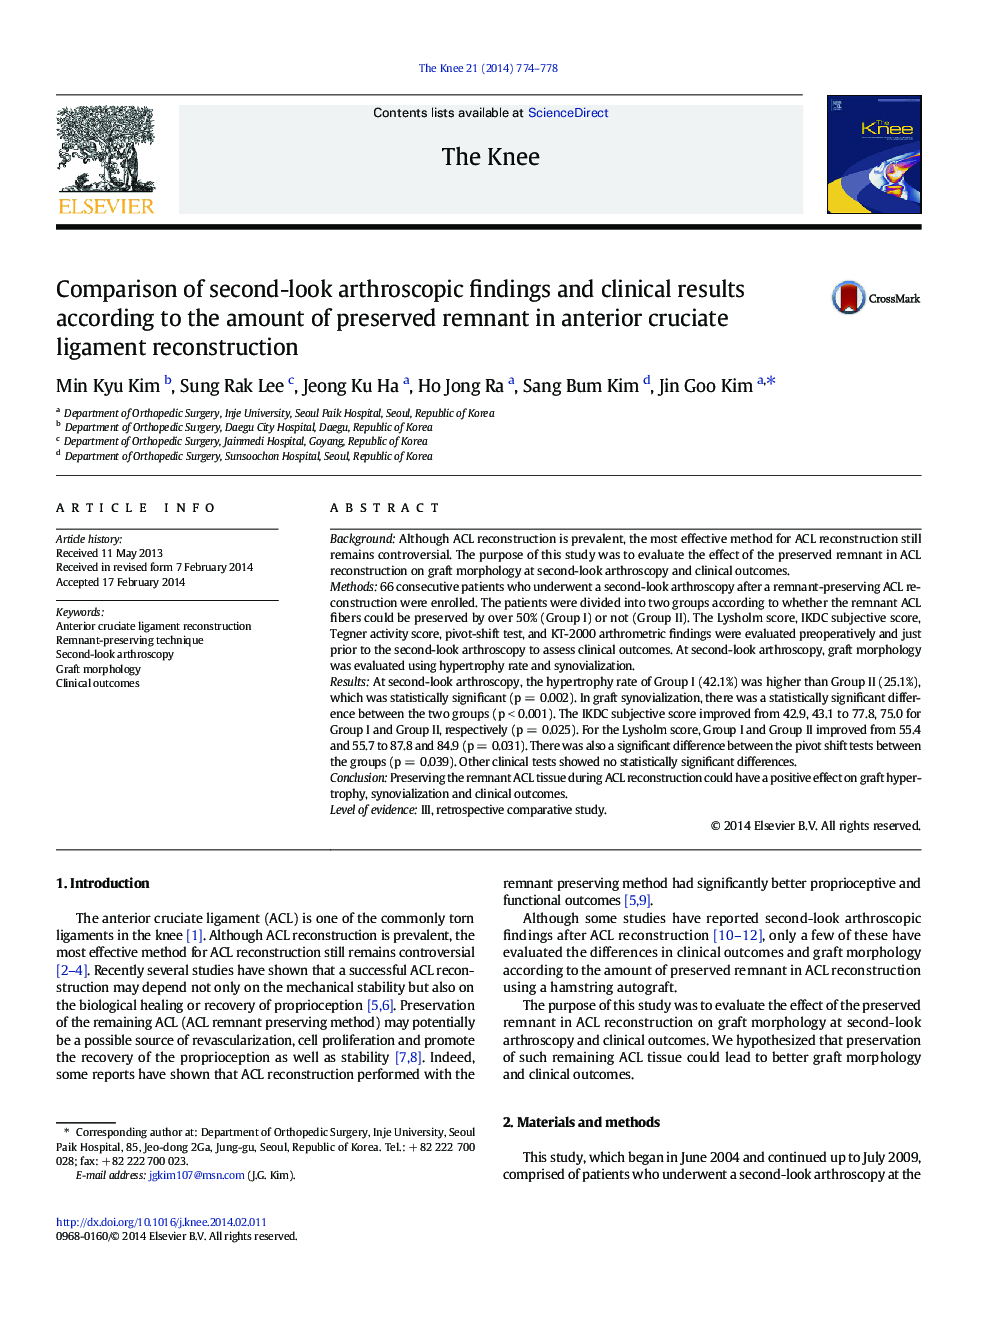 Comparison of second-look arthroscopic findings and clinical results according to the amount of preserved remnant in anterior cruciate ligament reconstruction